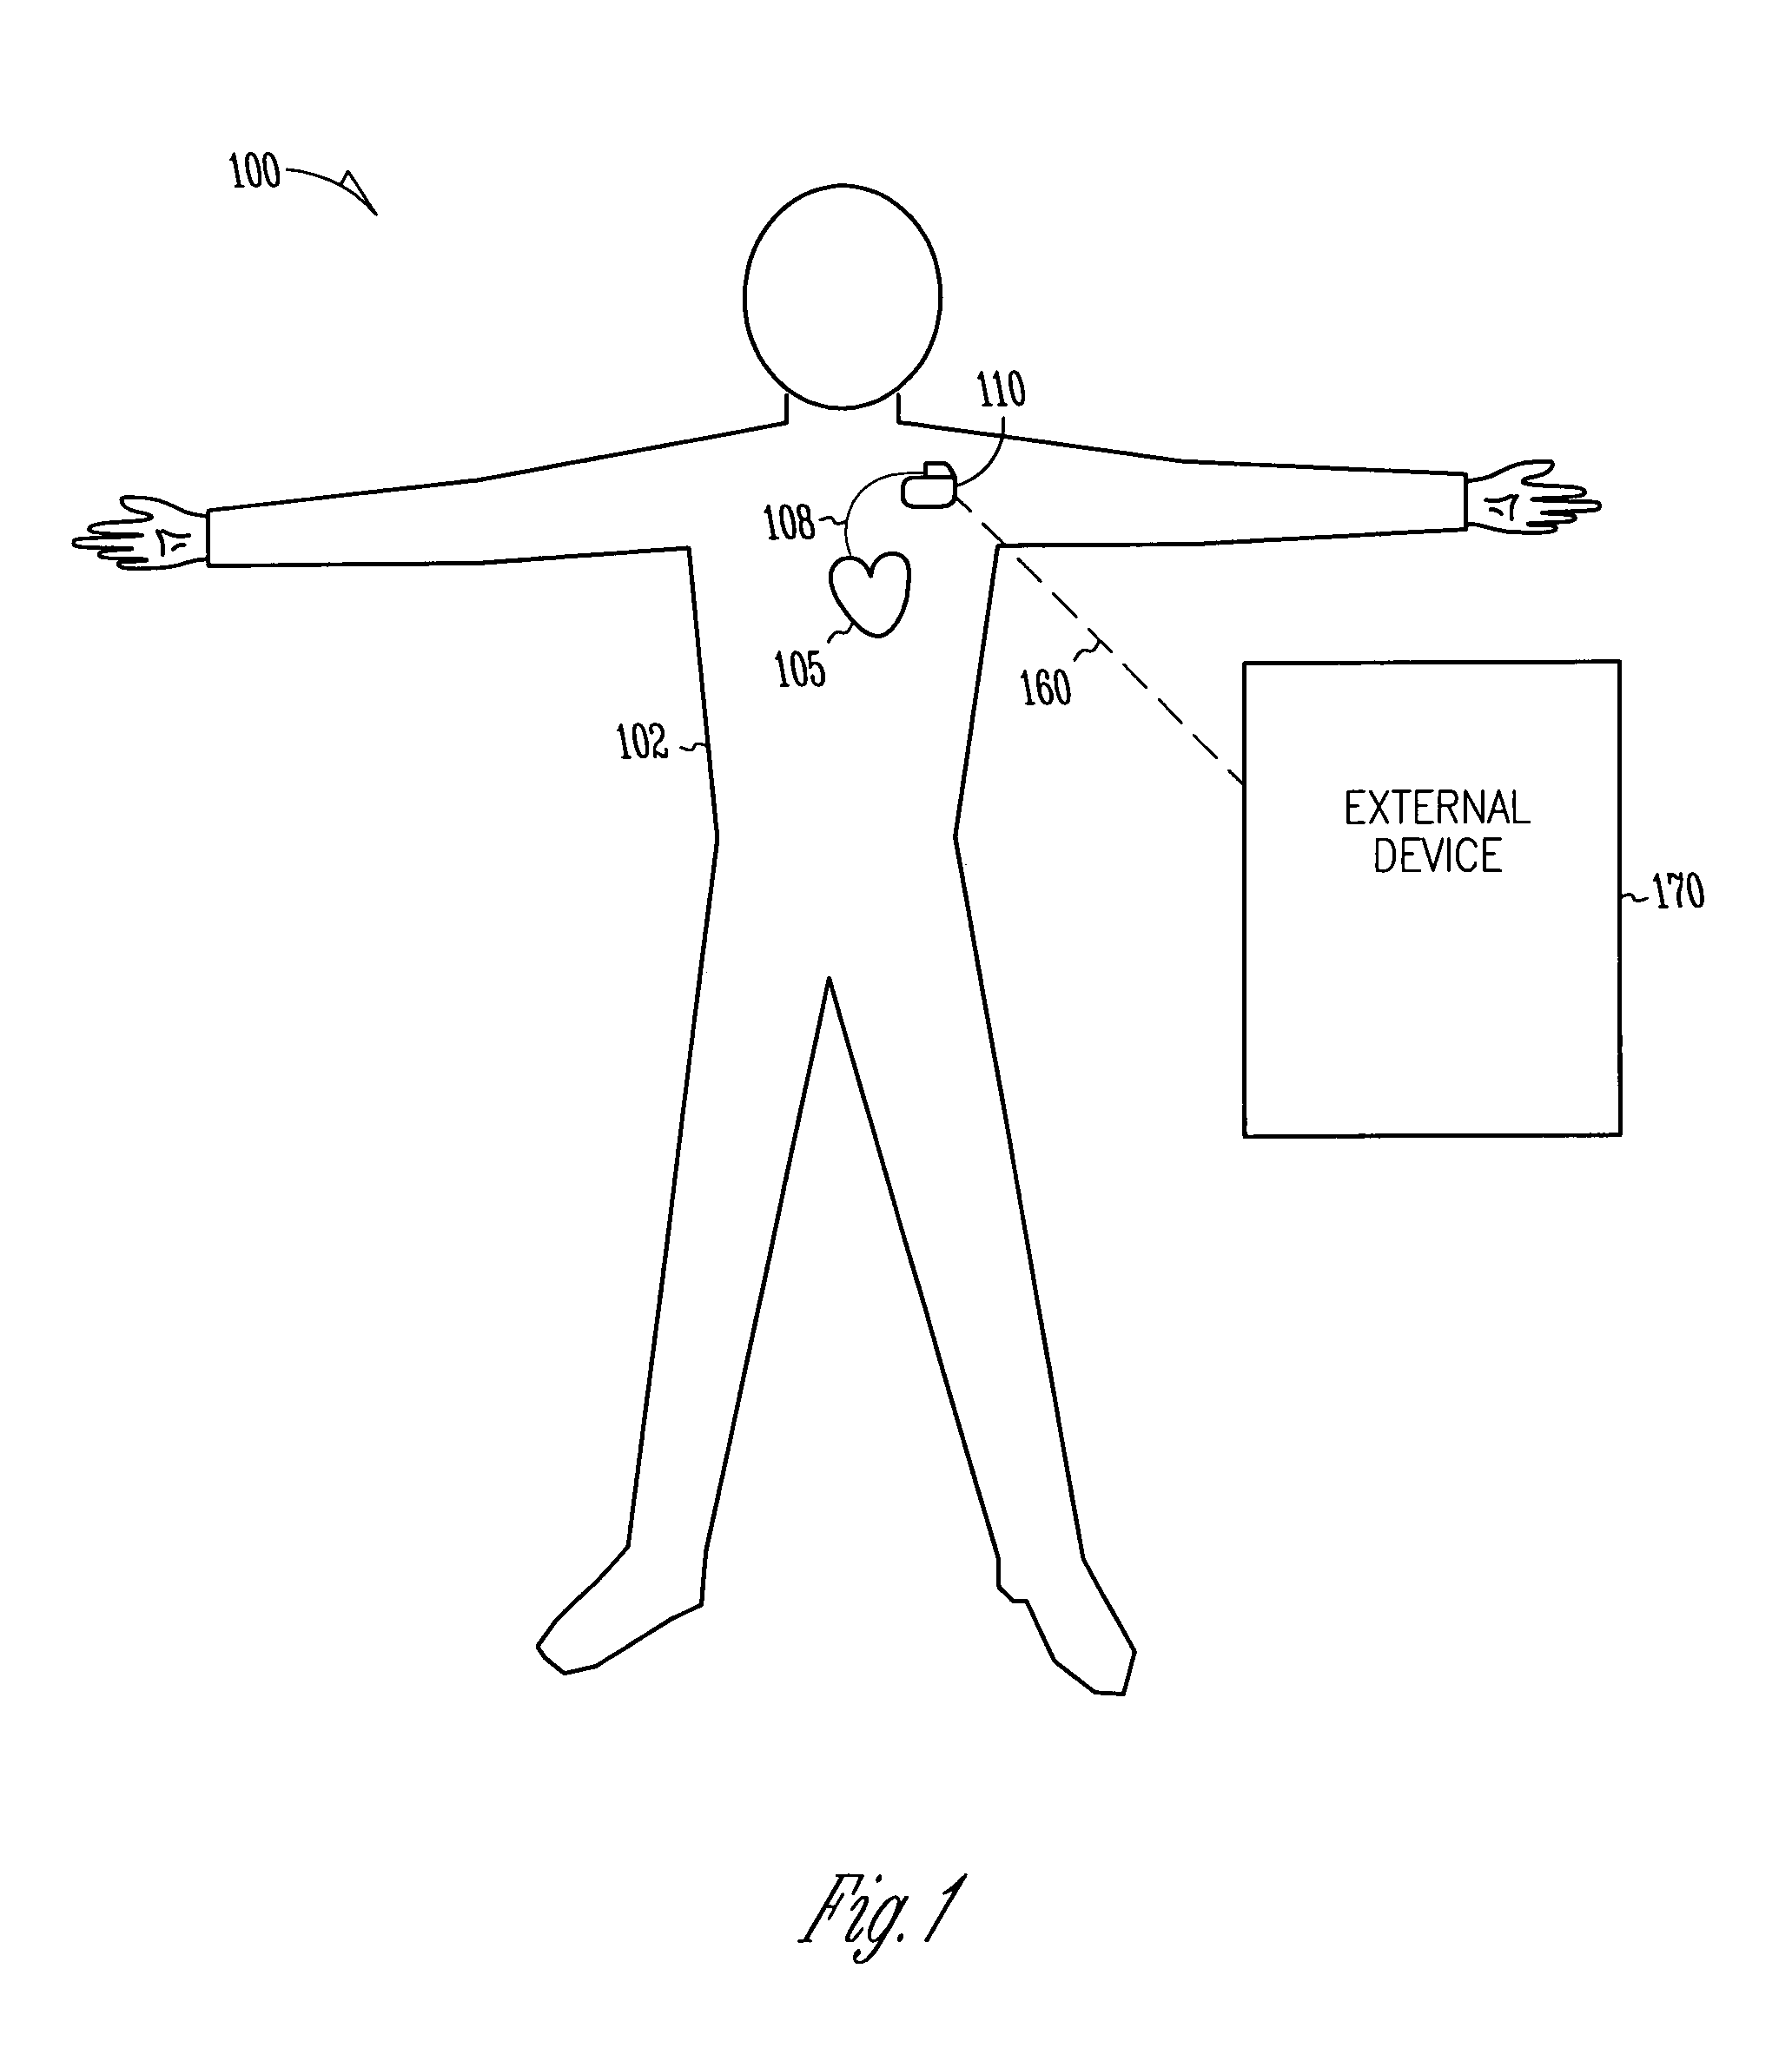 Adaptive software configuration for a medical device